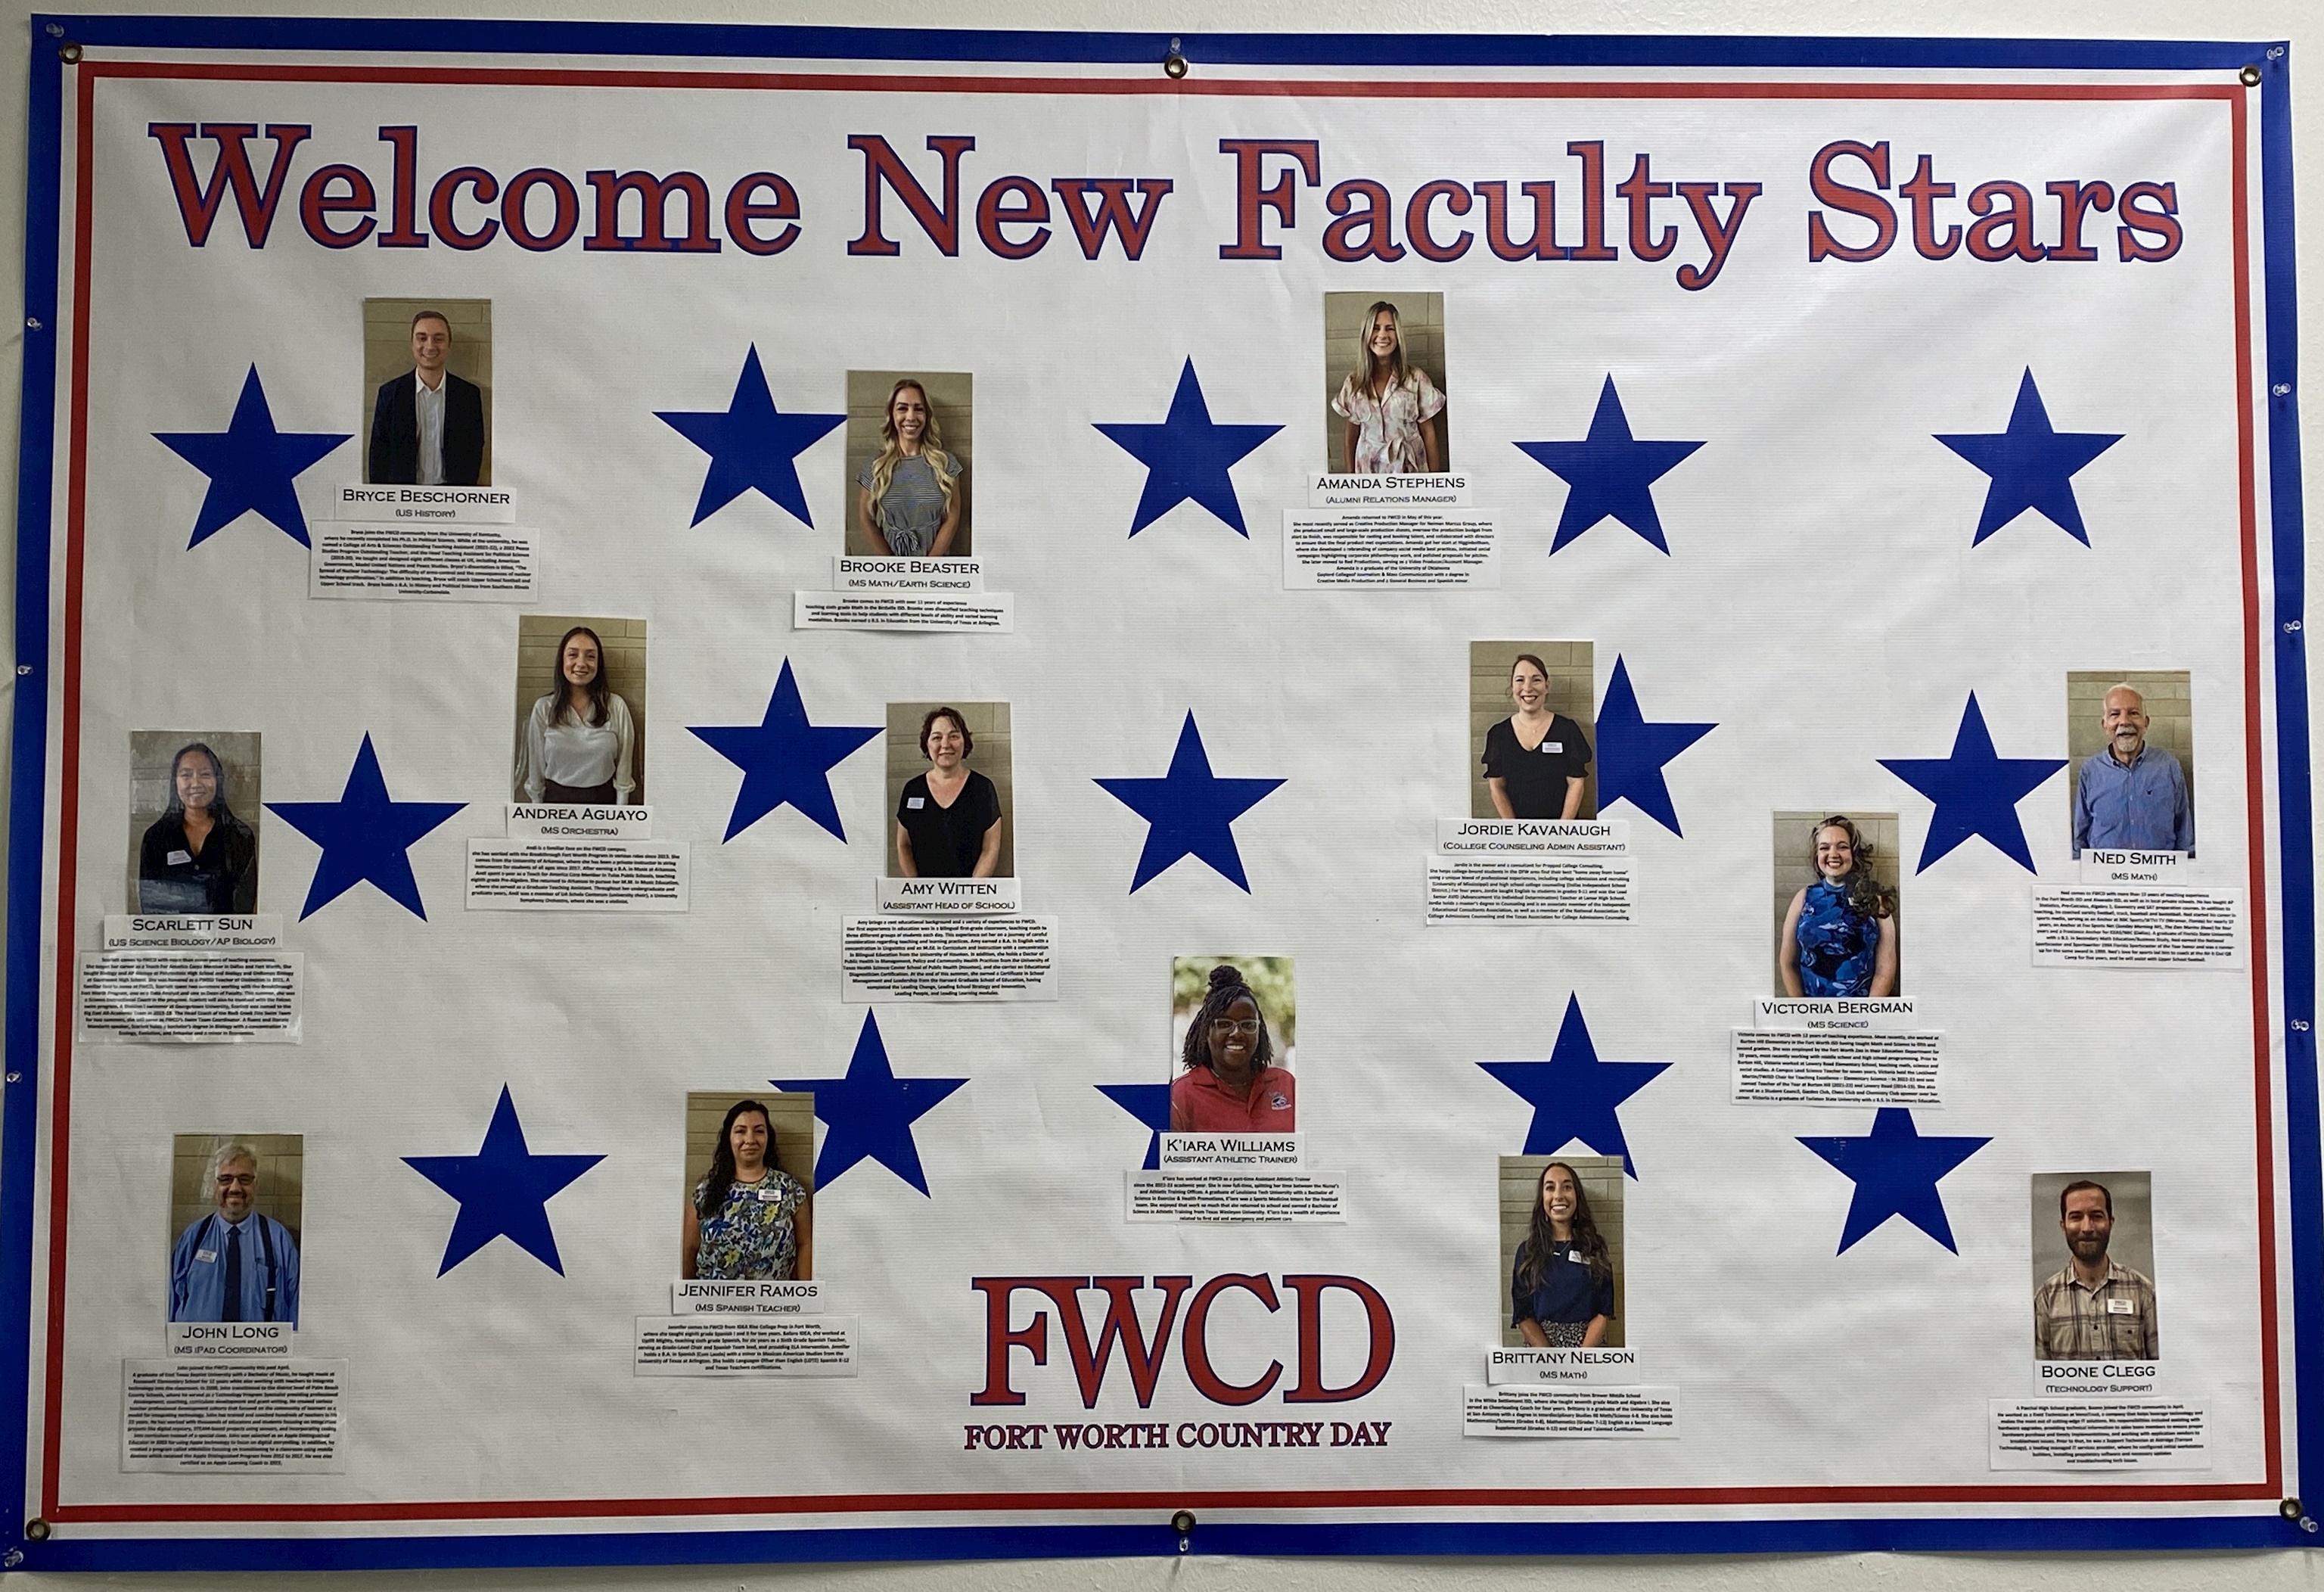 FWCD Faculty and Staff Class of 2023: And Other Points of Pride